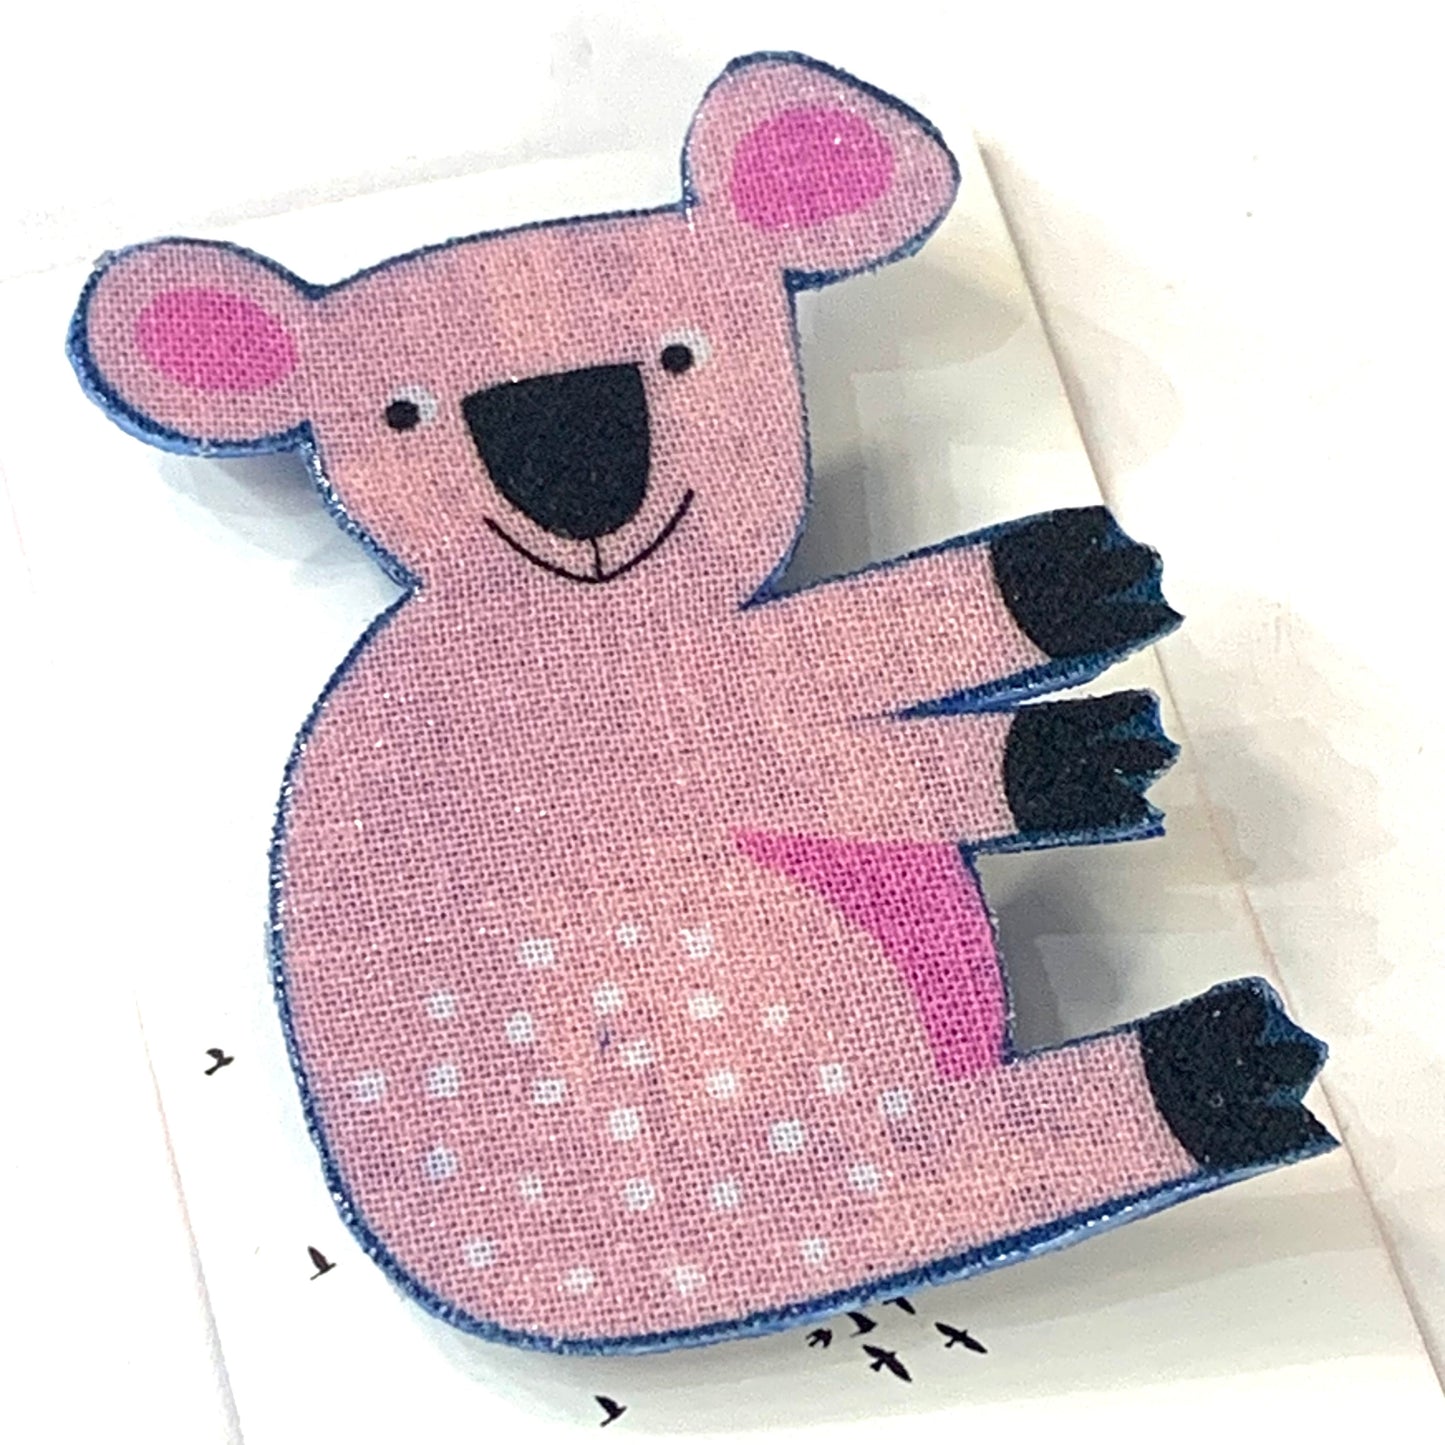 THIS BIRD HAS FLOWN- Fabric Remnant Brooches- Proust Pink Koala